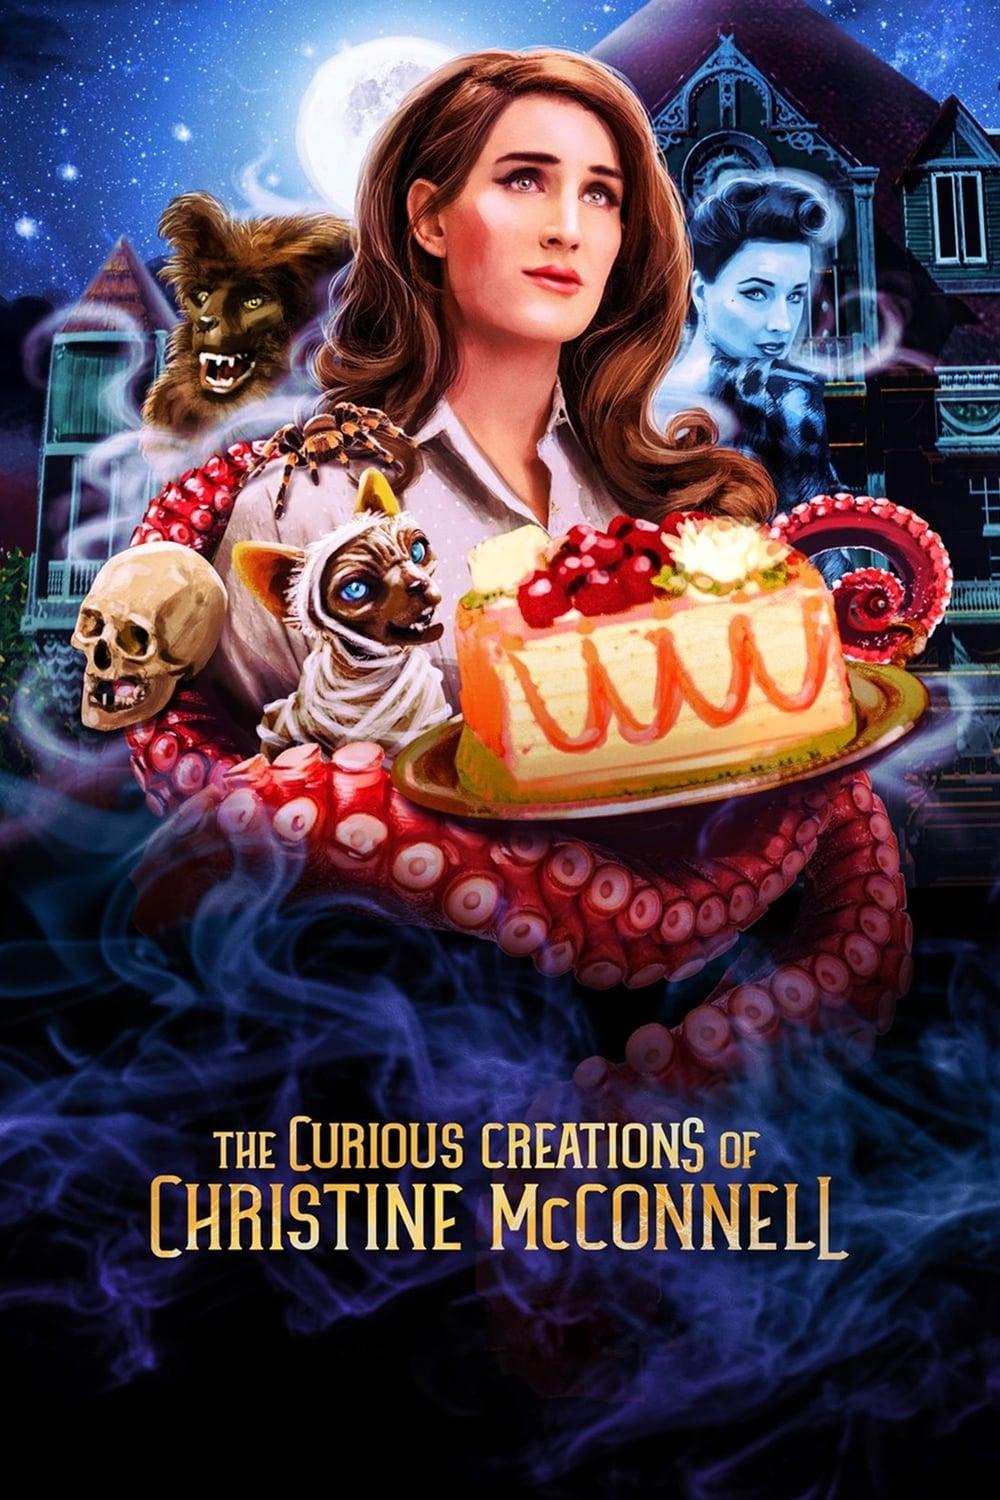 The Curious Creations of Christine McConnell poster